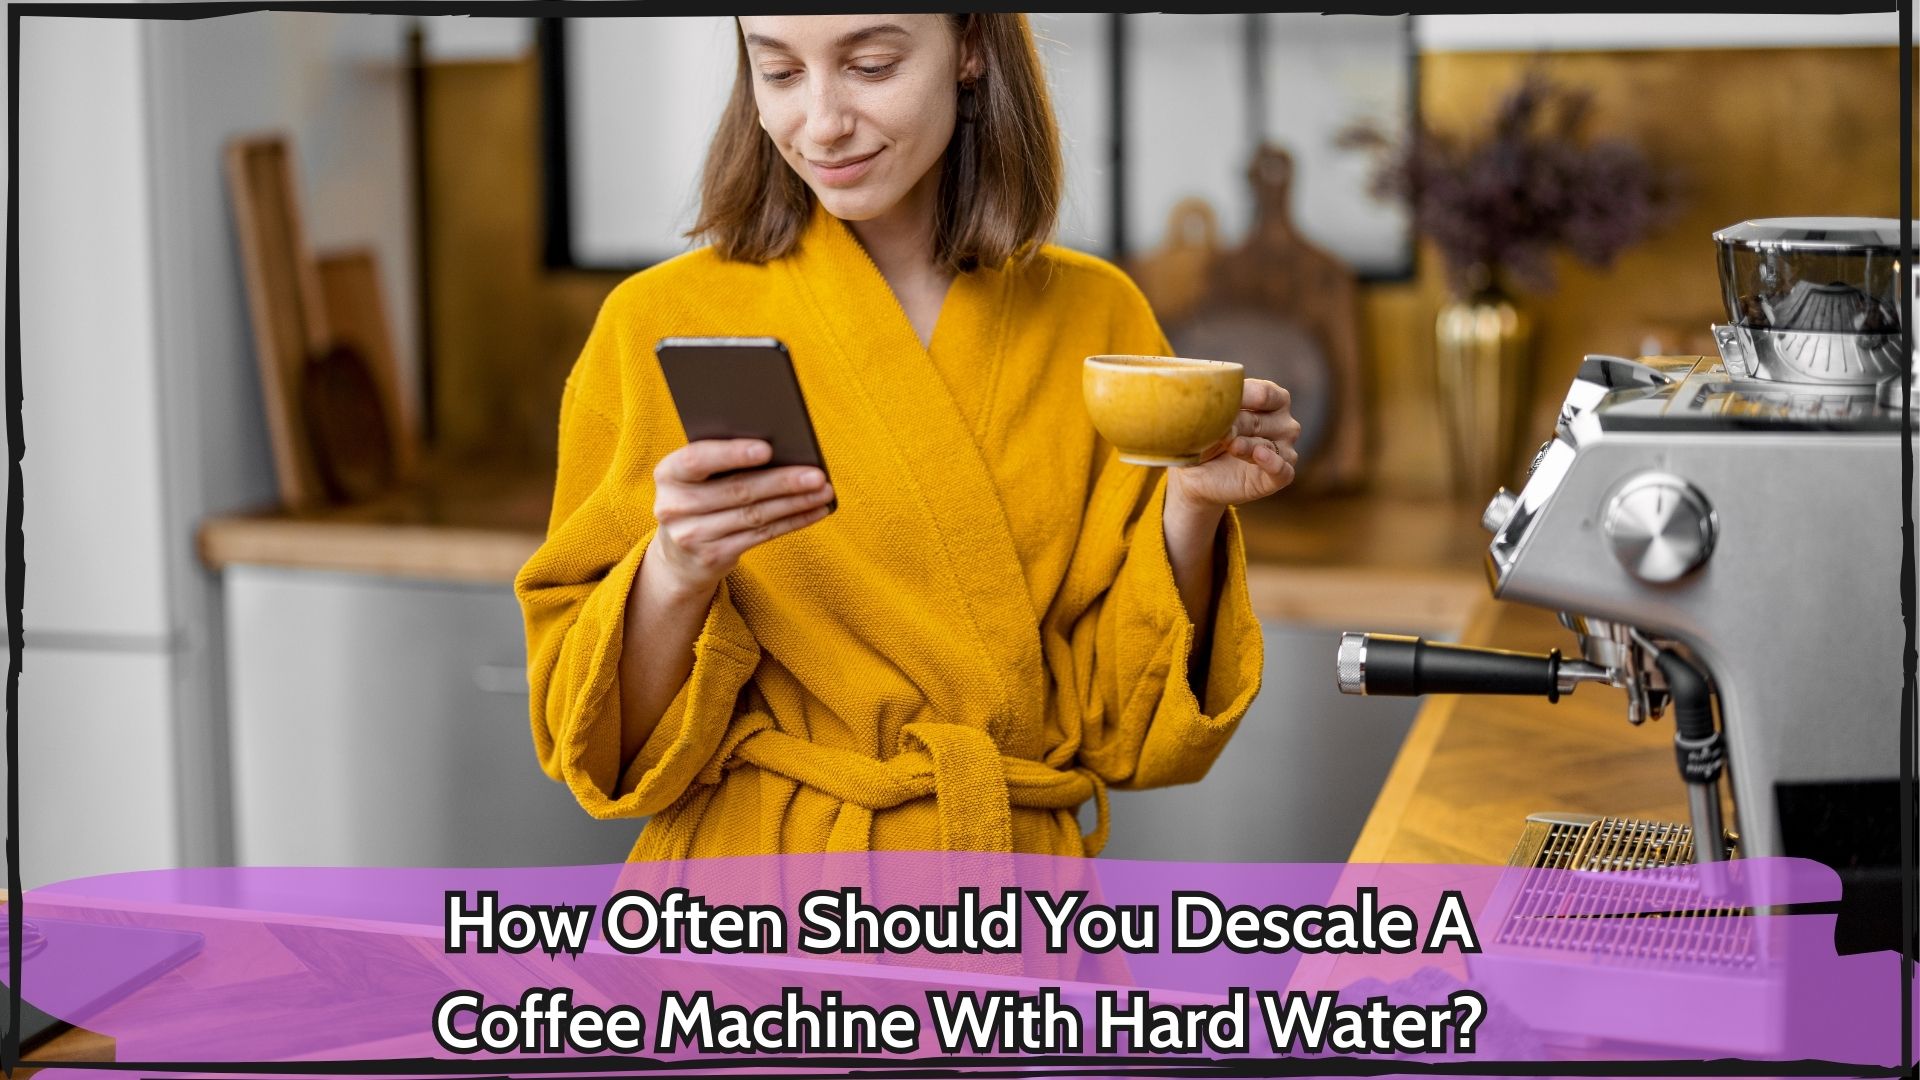 How Often Should You Descale A Coffee Machine With Hard Water?